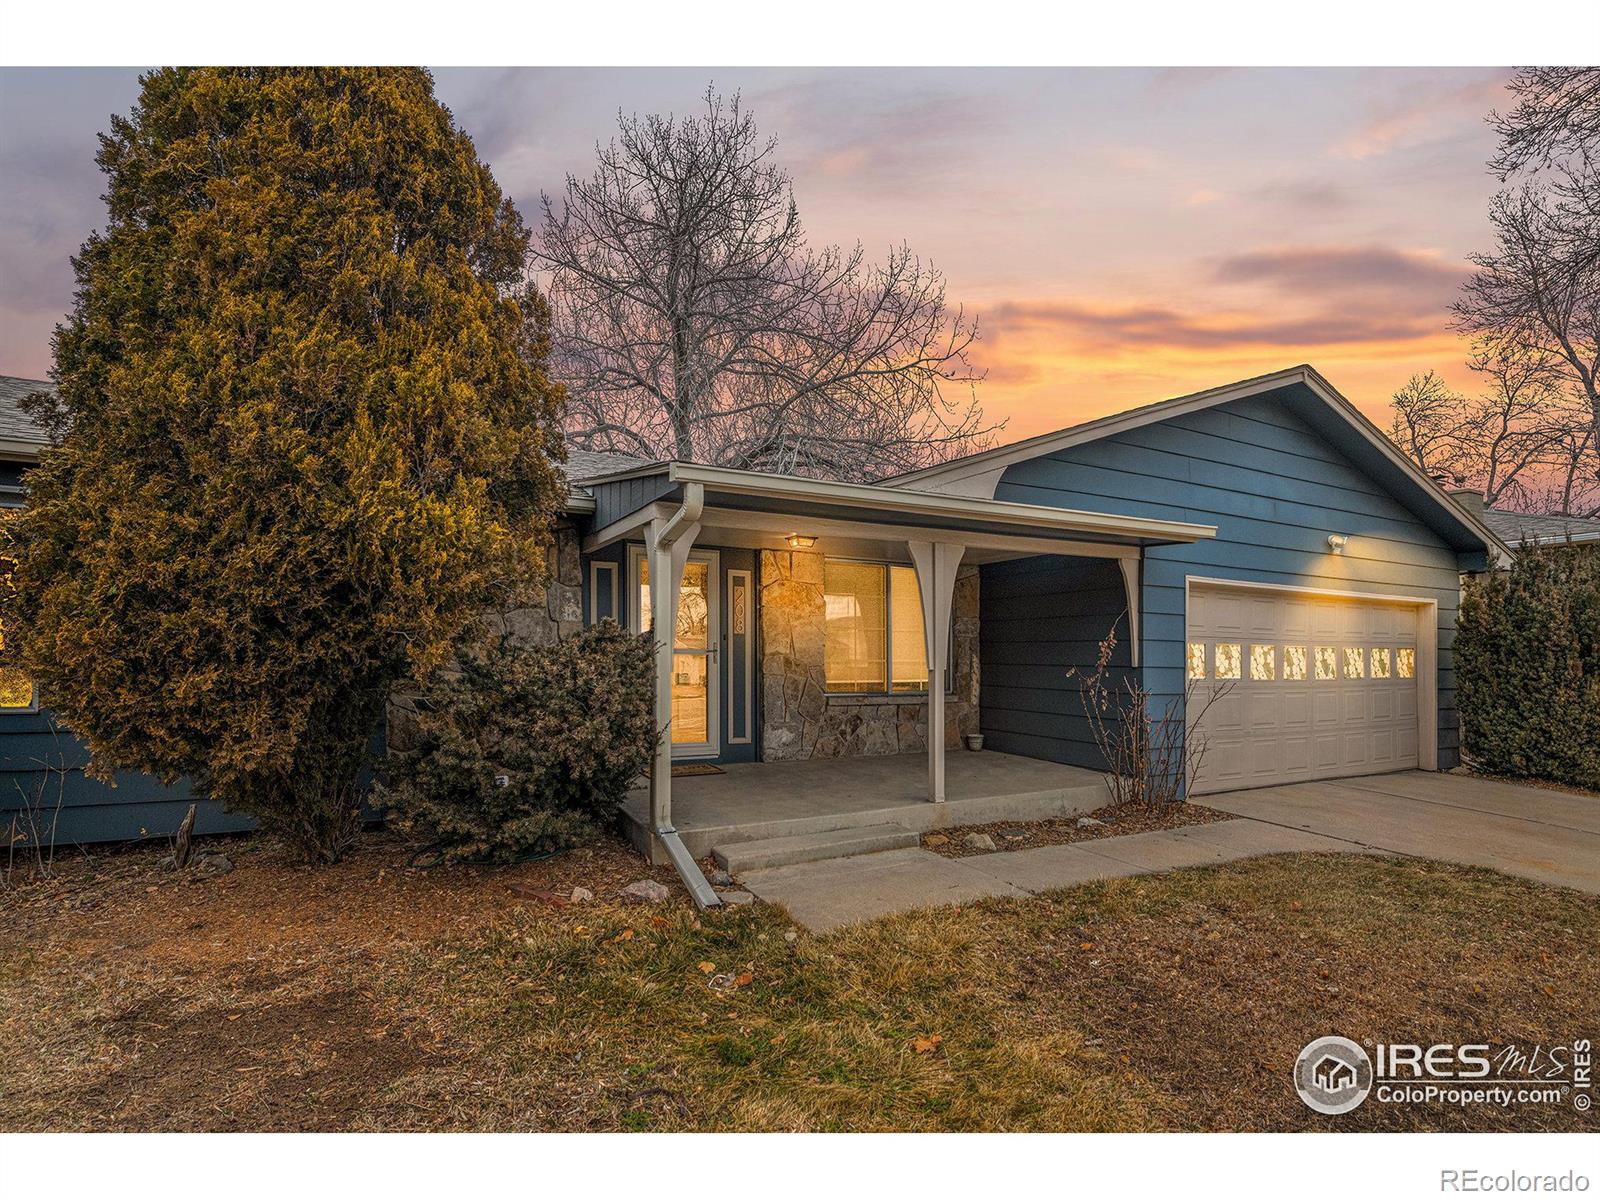 208 E Swallow Road, fort collins MLS: 4567891003421 Beds: 3 Baths: 2 Price: $527,000